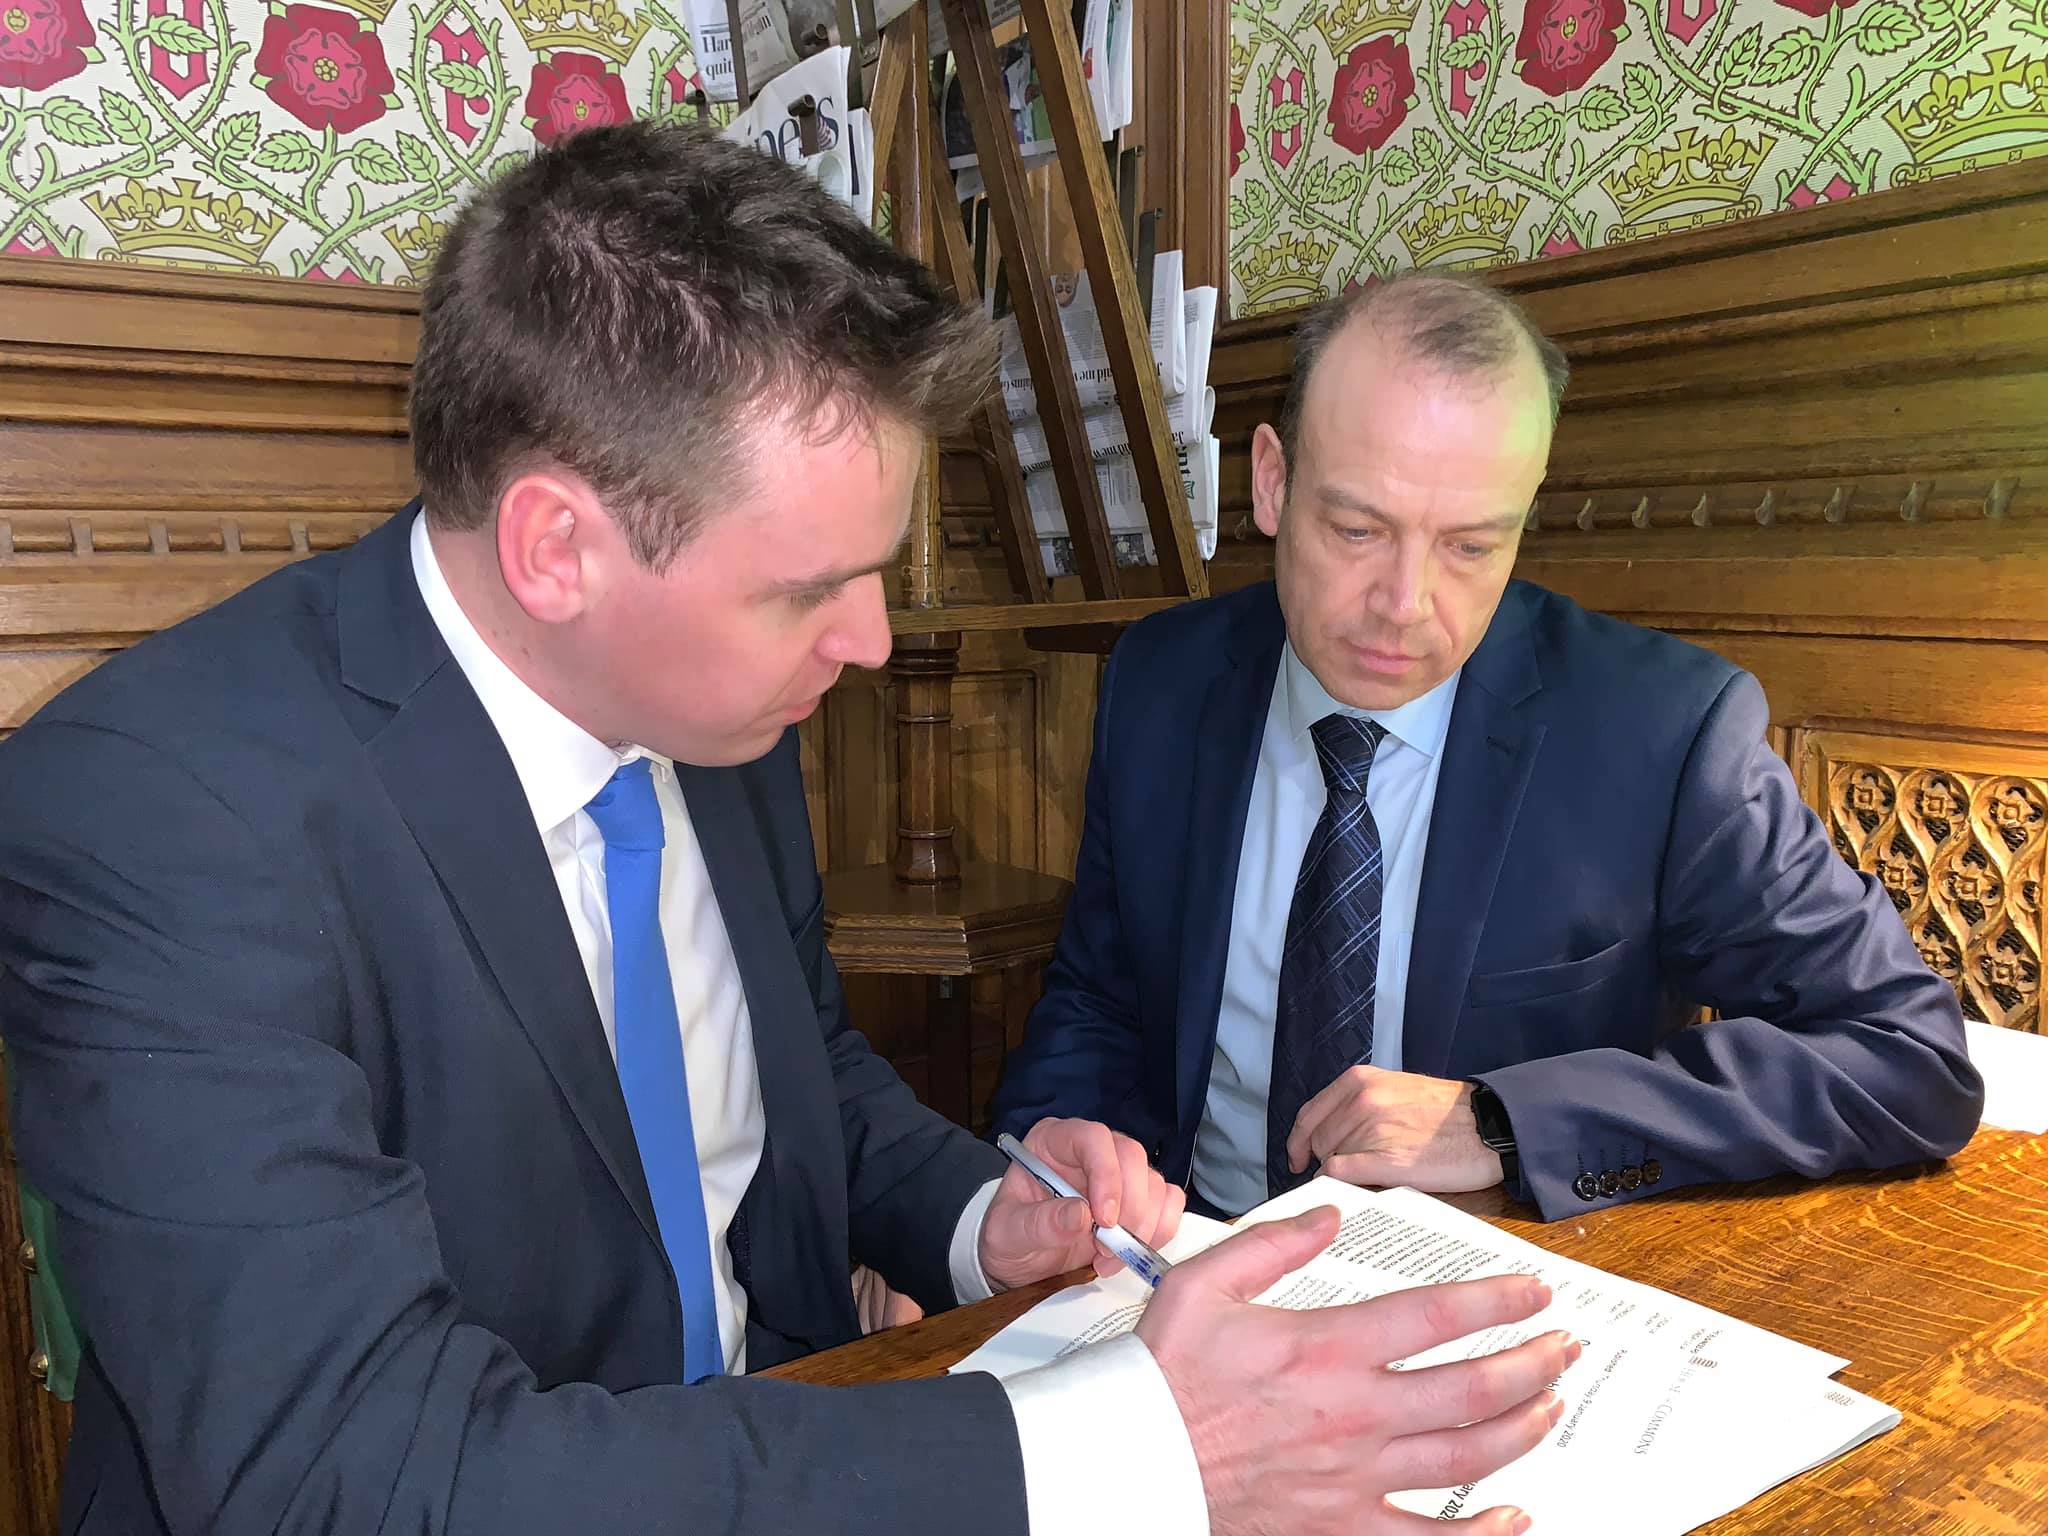 I was glad to be able to get the opportunity today to have a sit down discussion in Parliament with the Rail Minister Chris Heaton-Harris. I was challenging and made clear to him how unhappy many of my constituents are with the issues there have been with the Rail services they rely on over the past month.